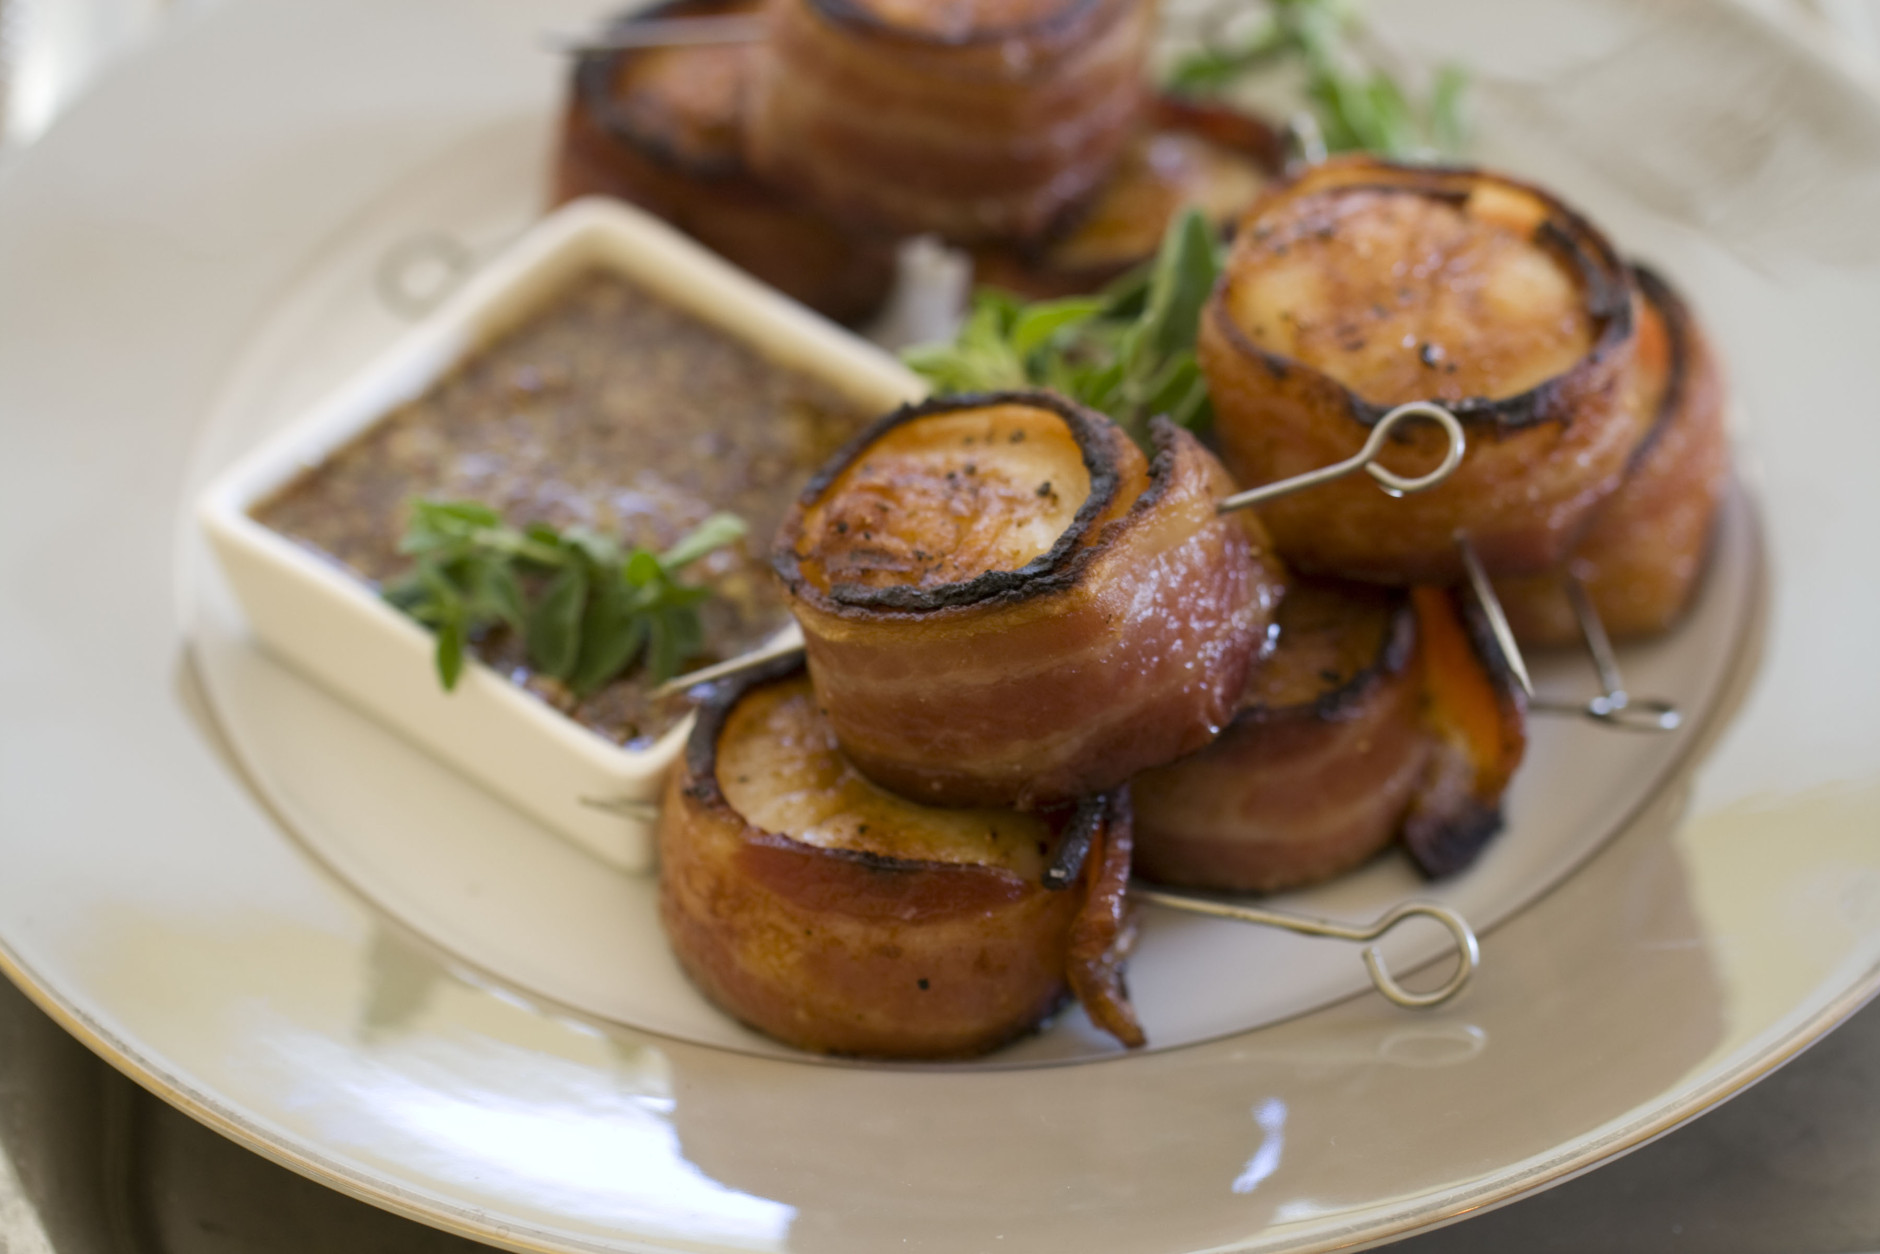 This Nov 4, 2013 photo shows grilled bacon wrapped scallops in Concord, N.H. This all-protein finger food appetizer is perfect for holiday entertaining. (AP Photo/Matthew Mead)